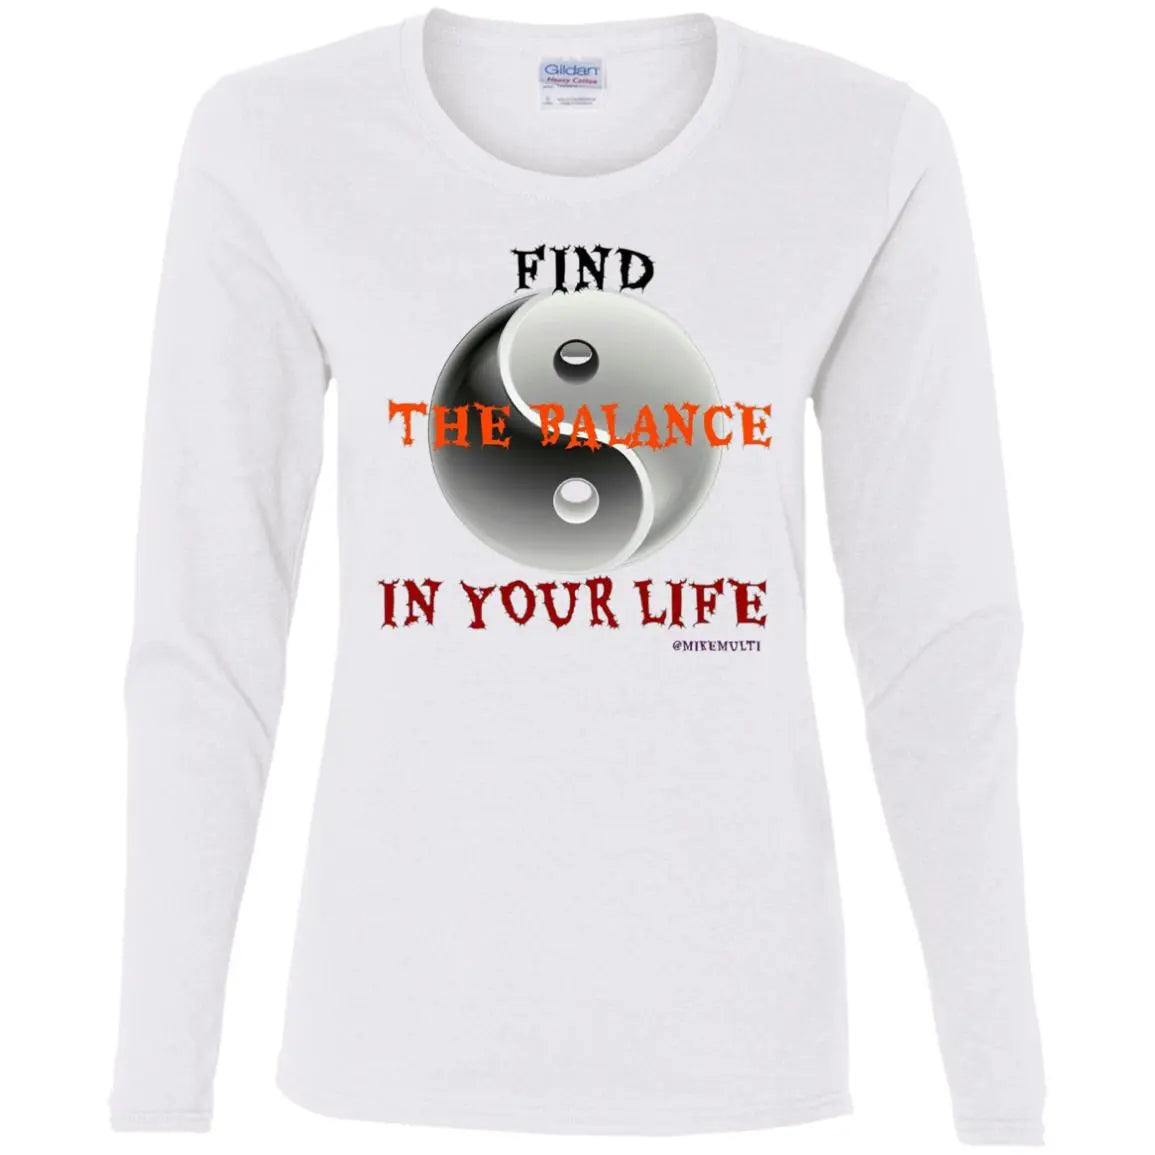 Find The Balance In Your Life - Ladies' Cotton LS T-Shirt CustomCat